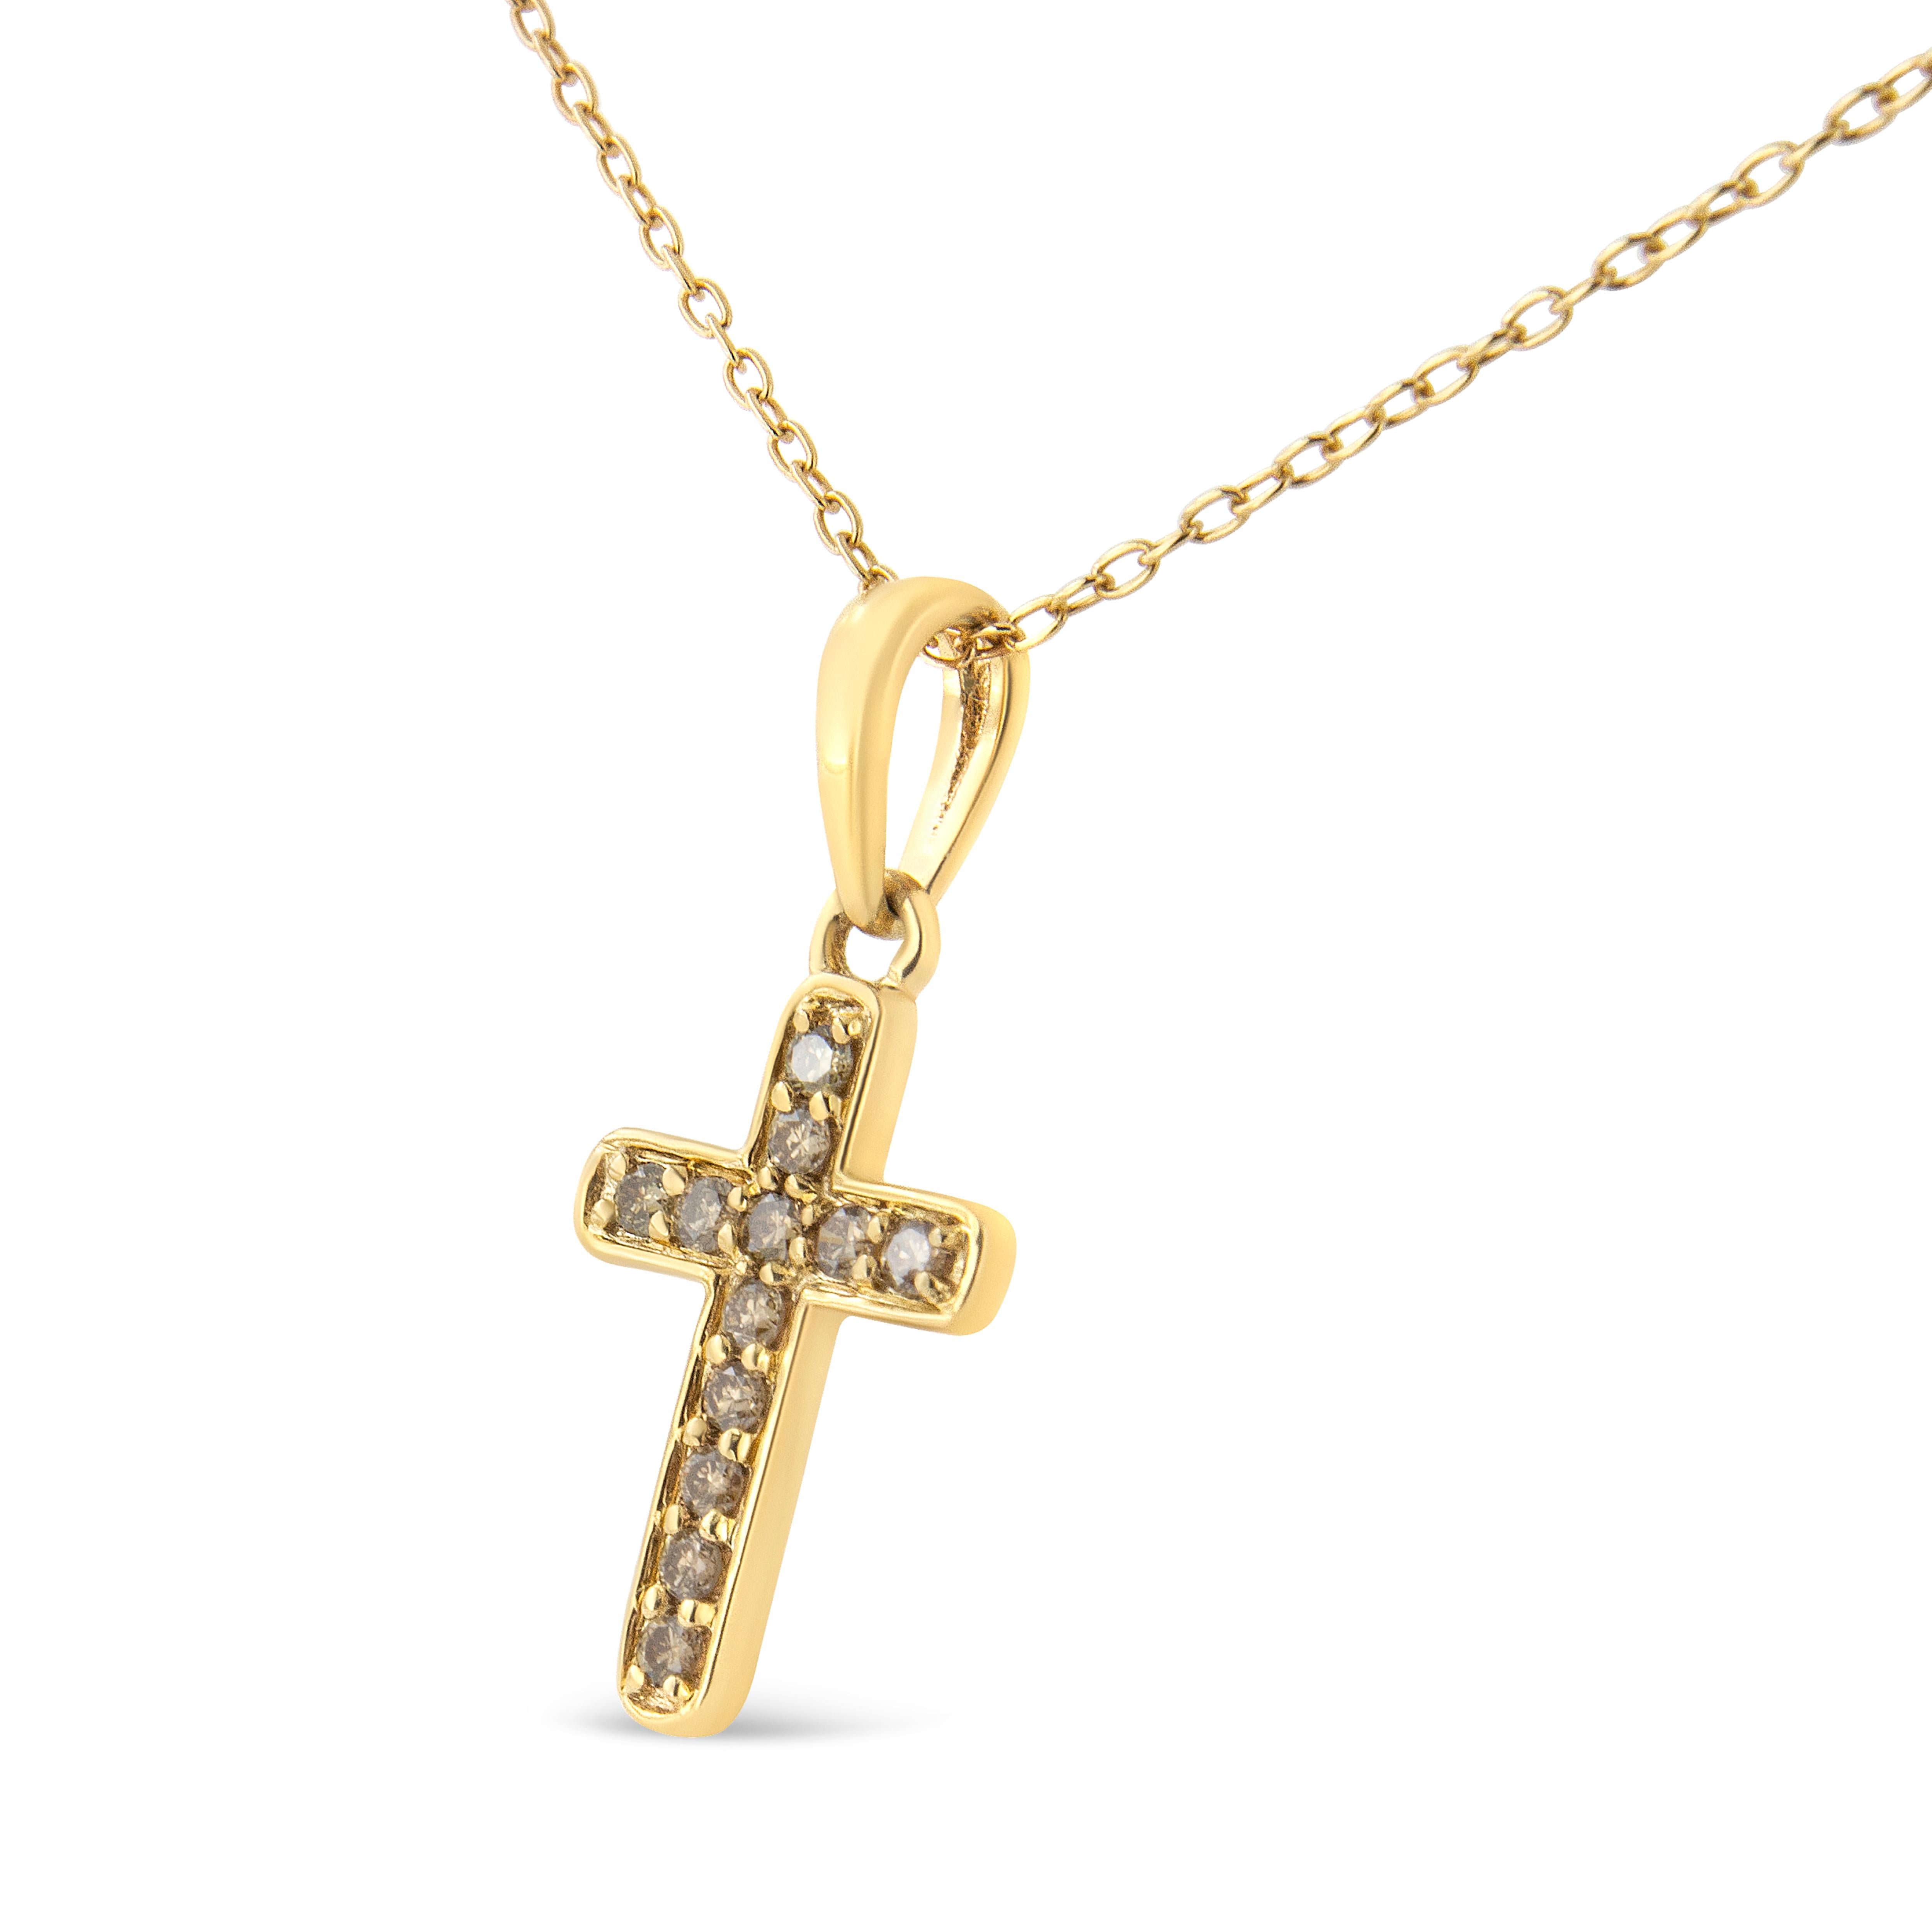 Celebrate your faith with this divine 10kt yellow gold plated 925 sterling silver cross necklace. This pendant is embellished with 12 round cut champagne color diamonds in classic shared prong settings. The pendant has diamonds totaling 1/4 carat